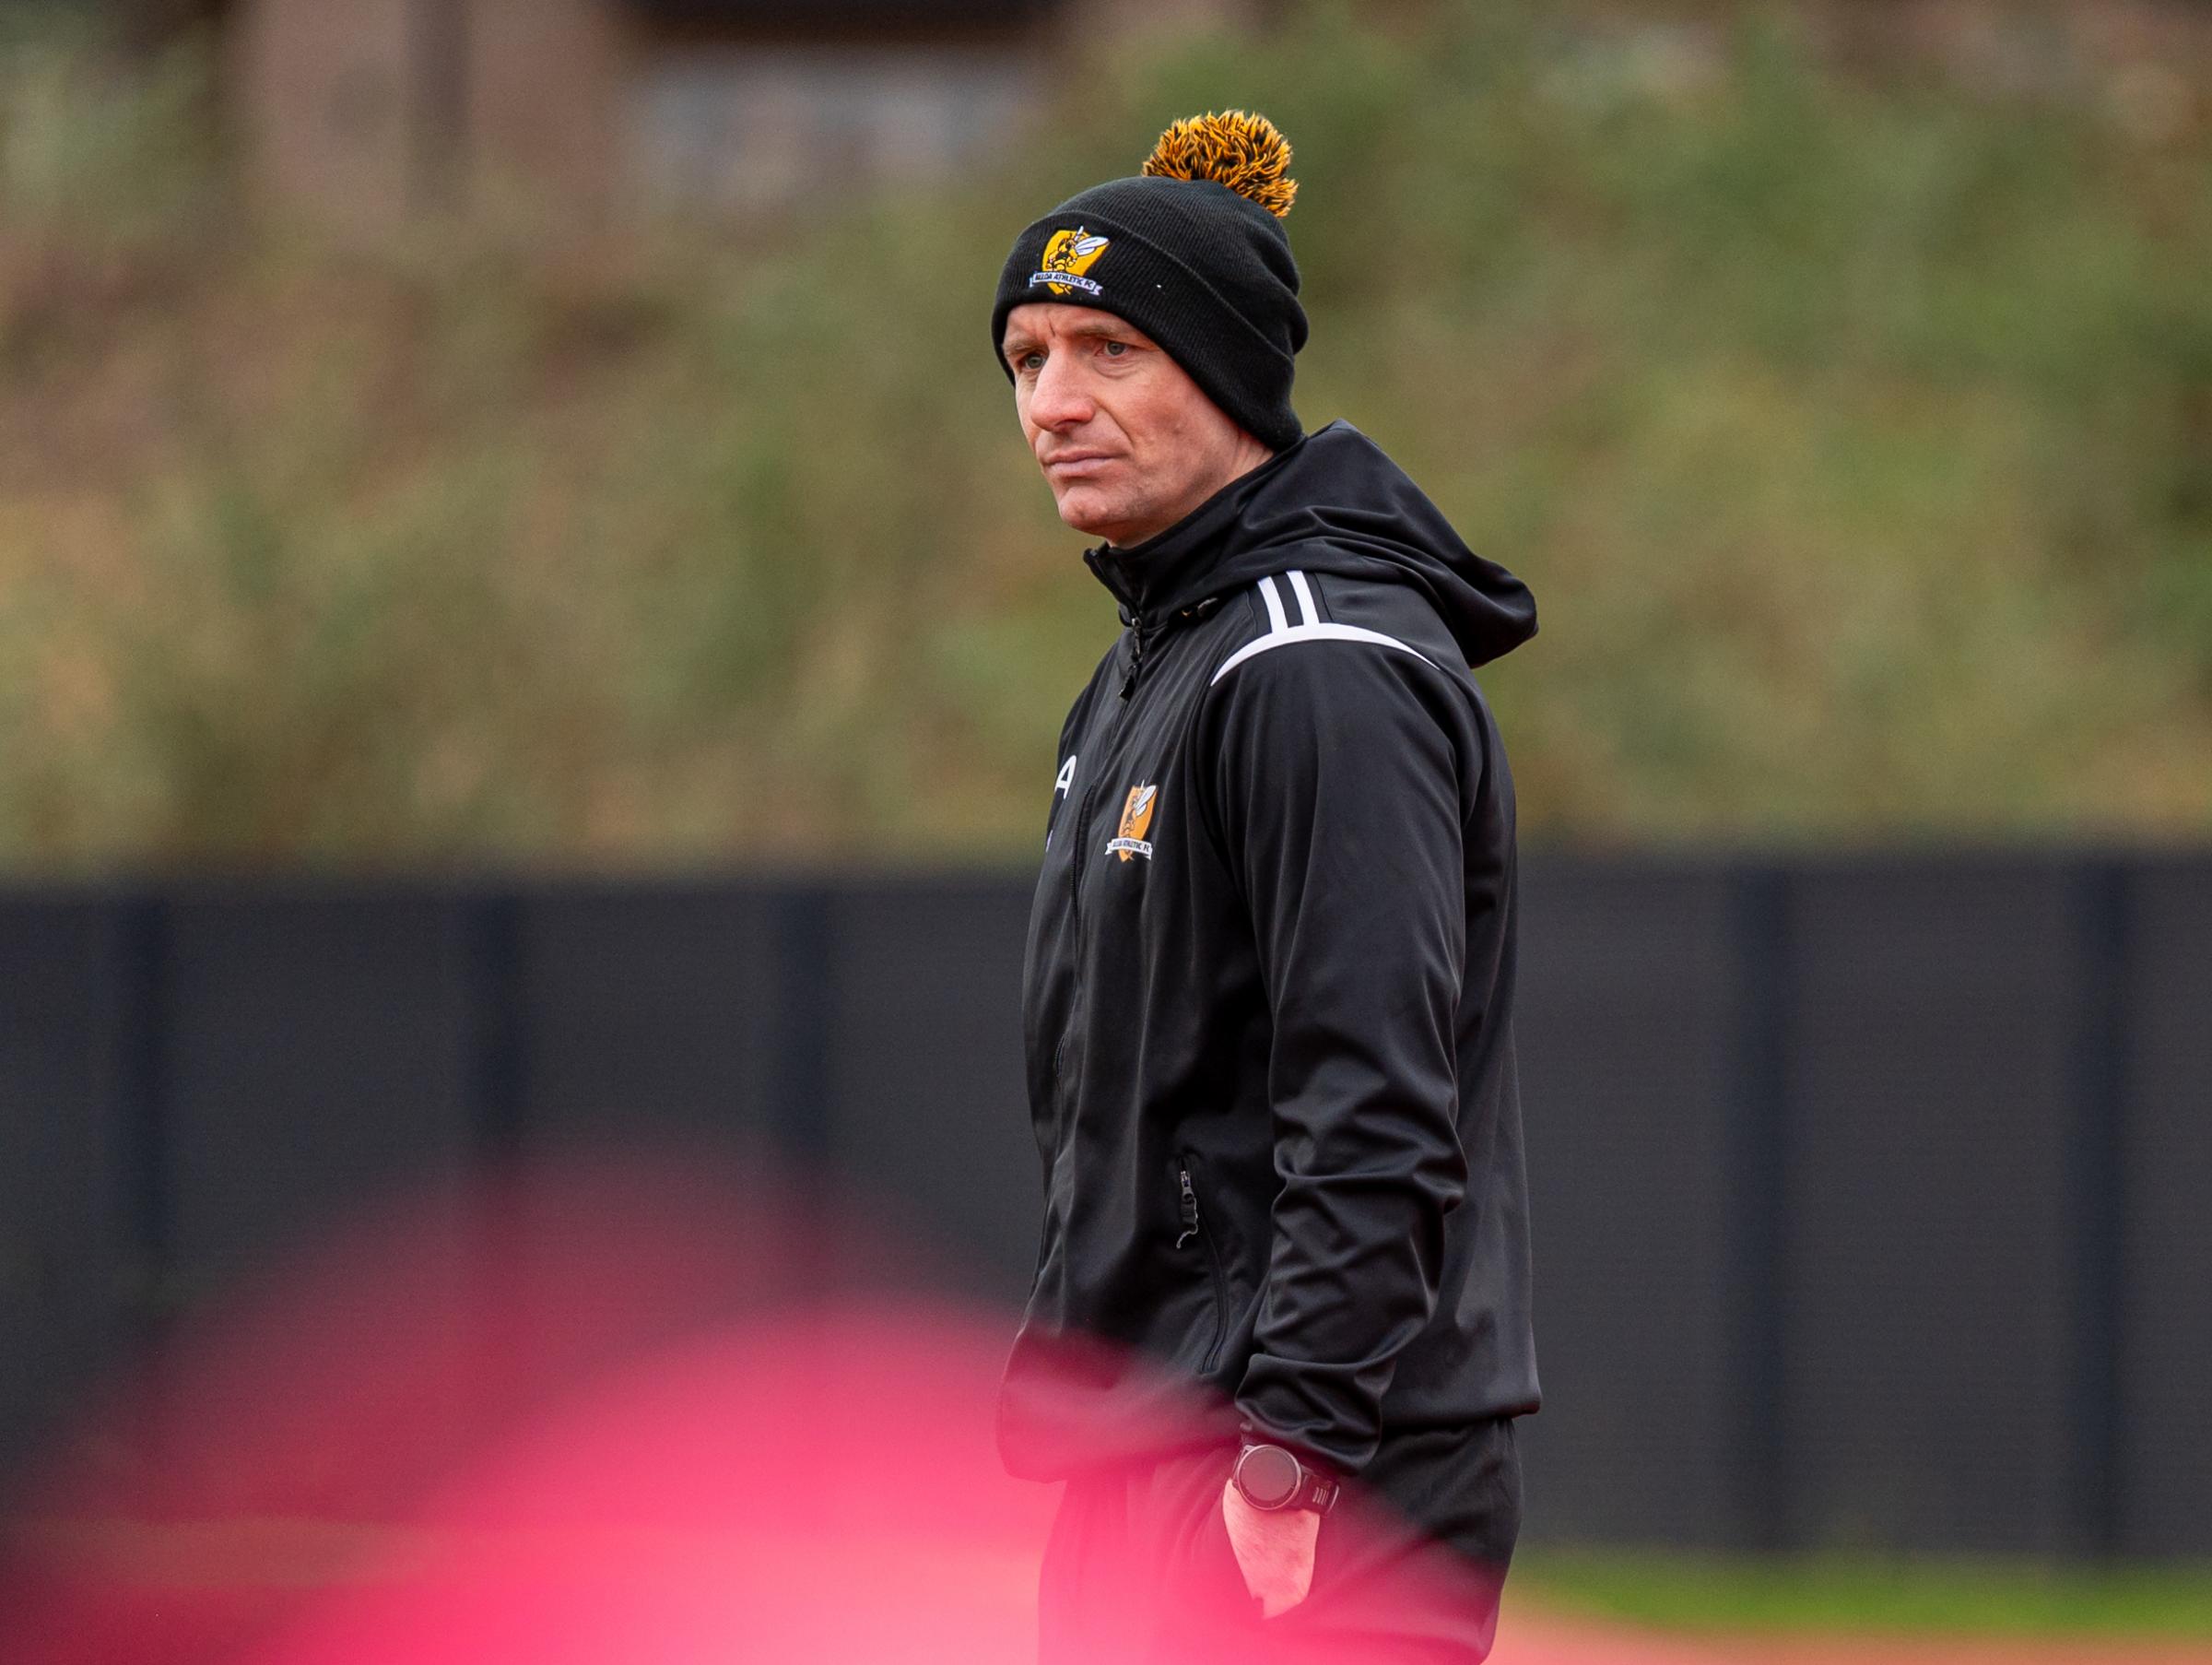 Alloa v Hamilton preview: Team news and manager chat